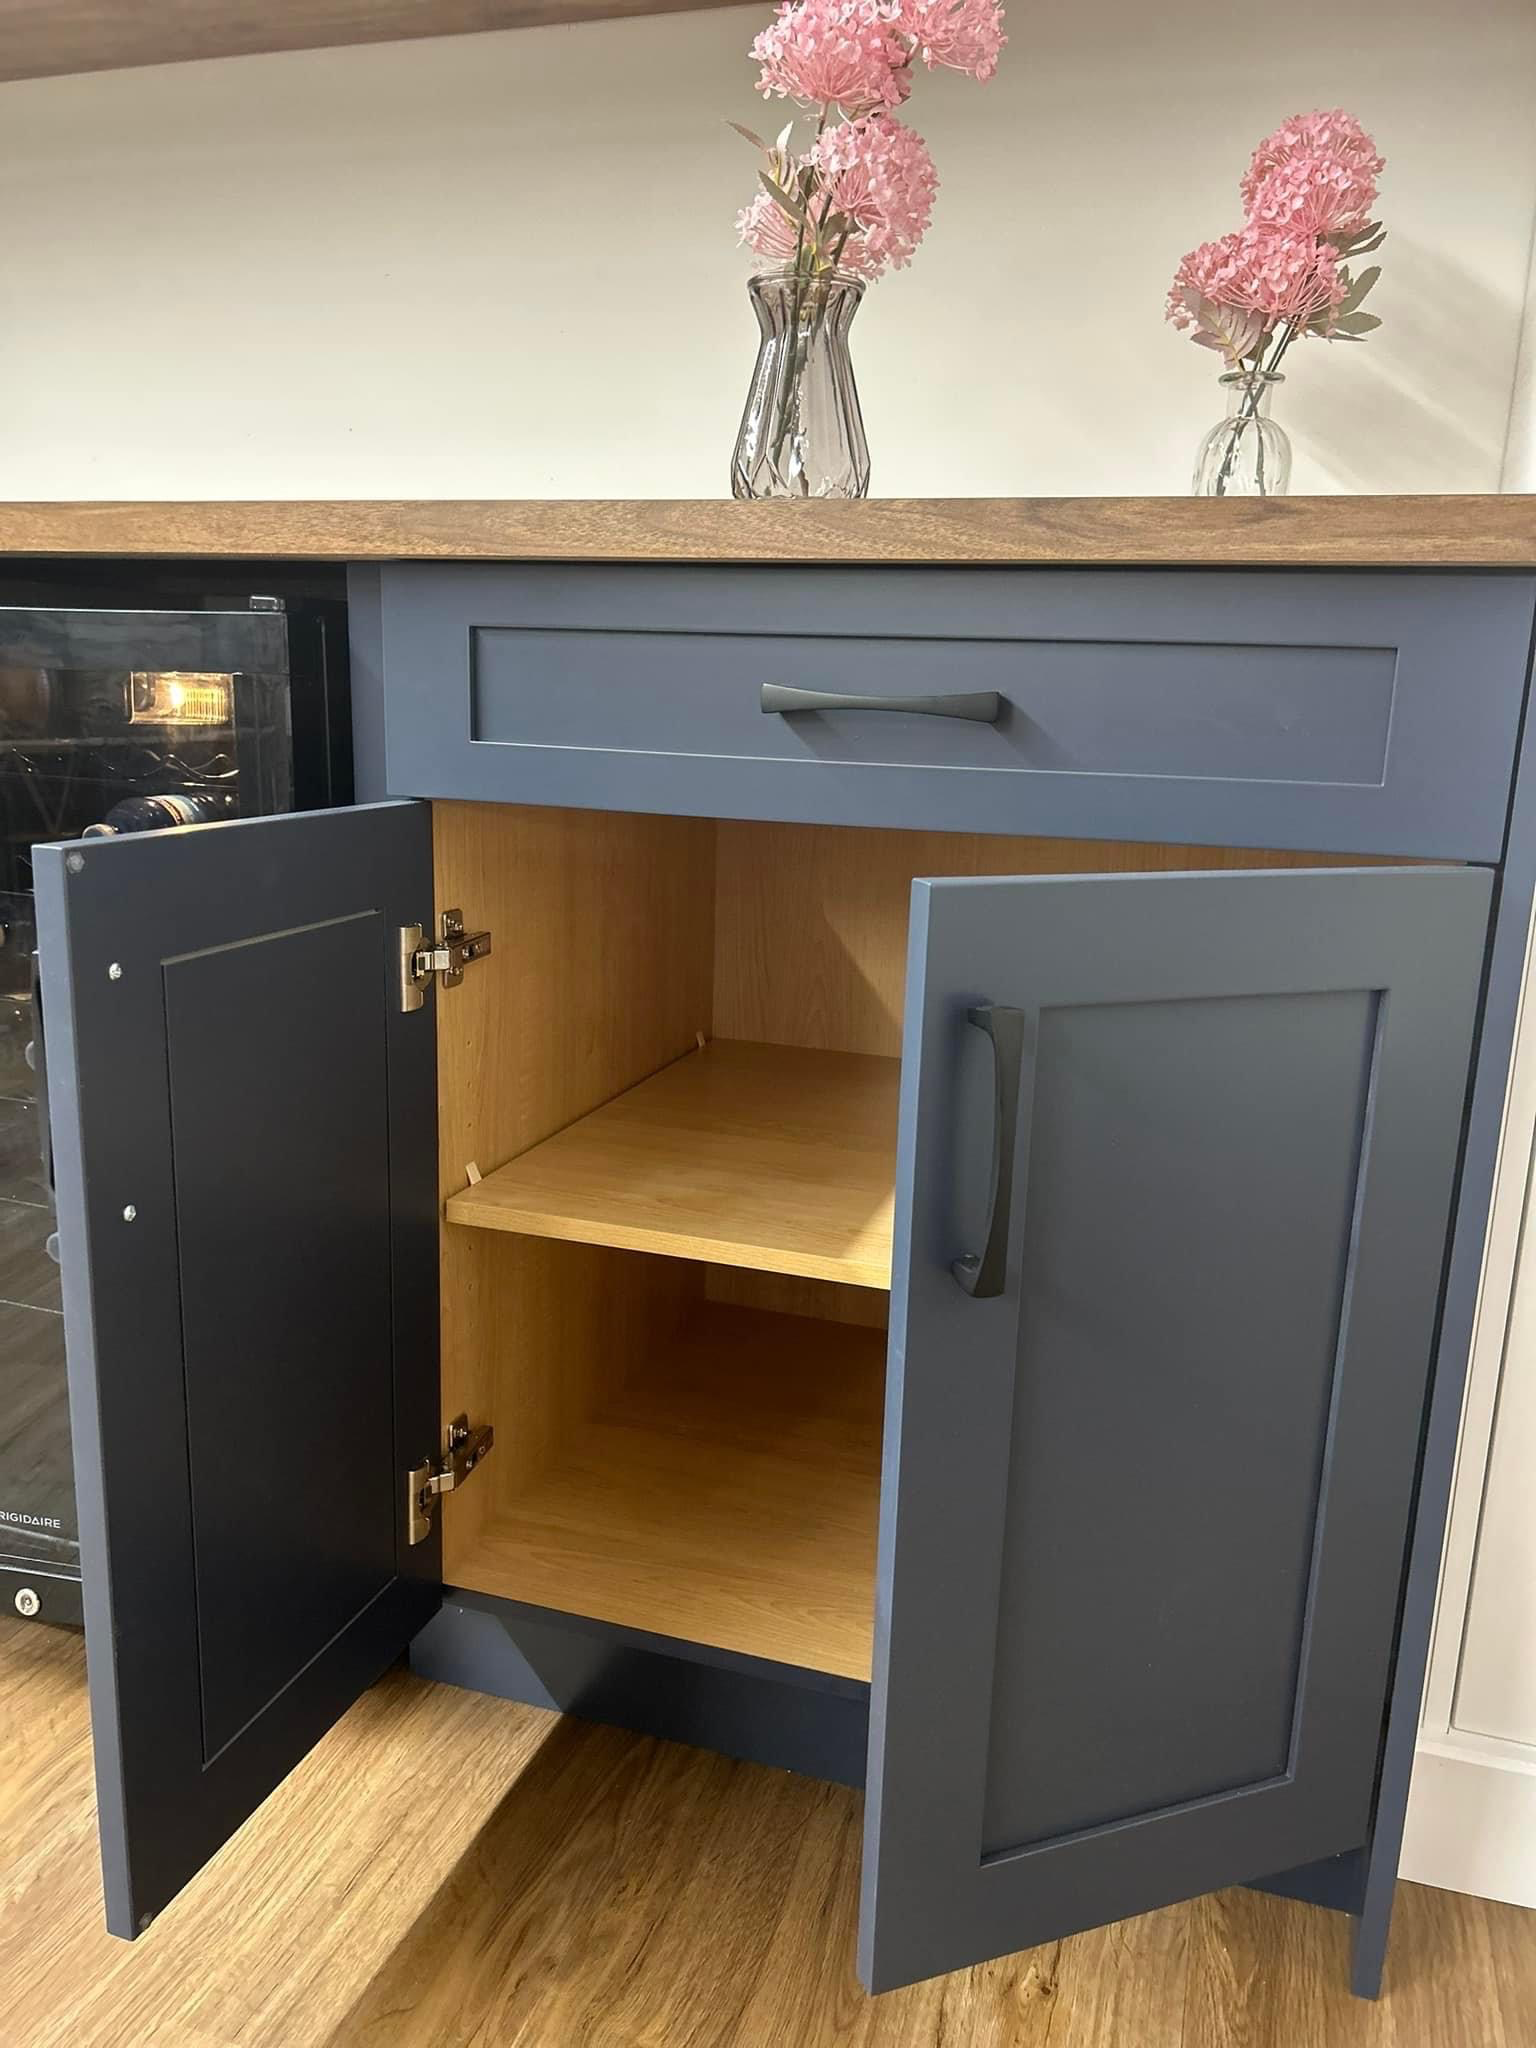 Custom lower cabinetry in a deep blue